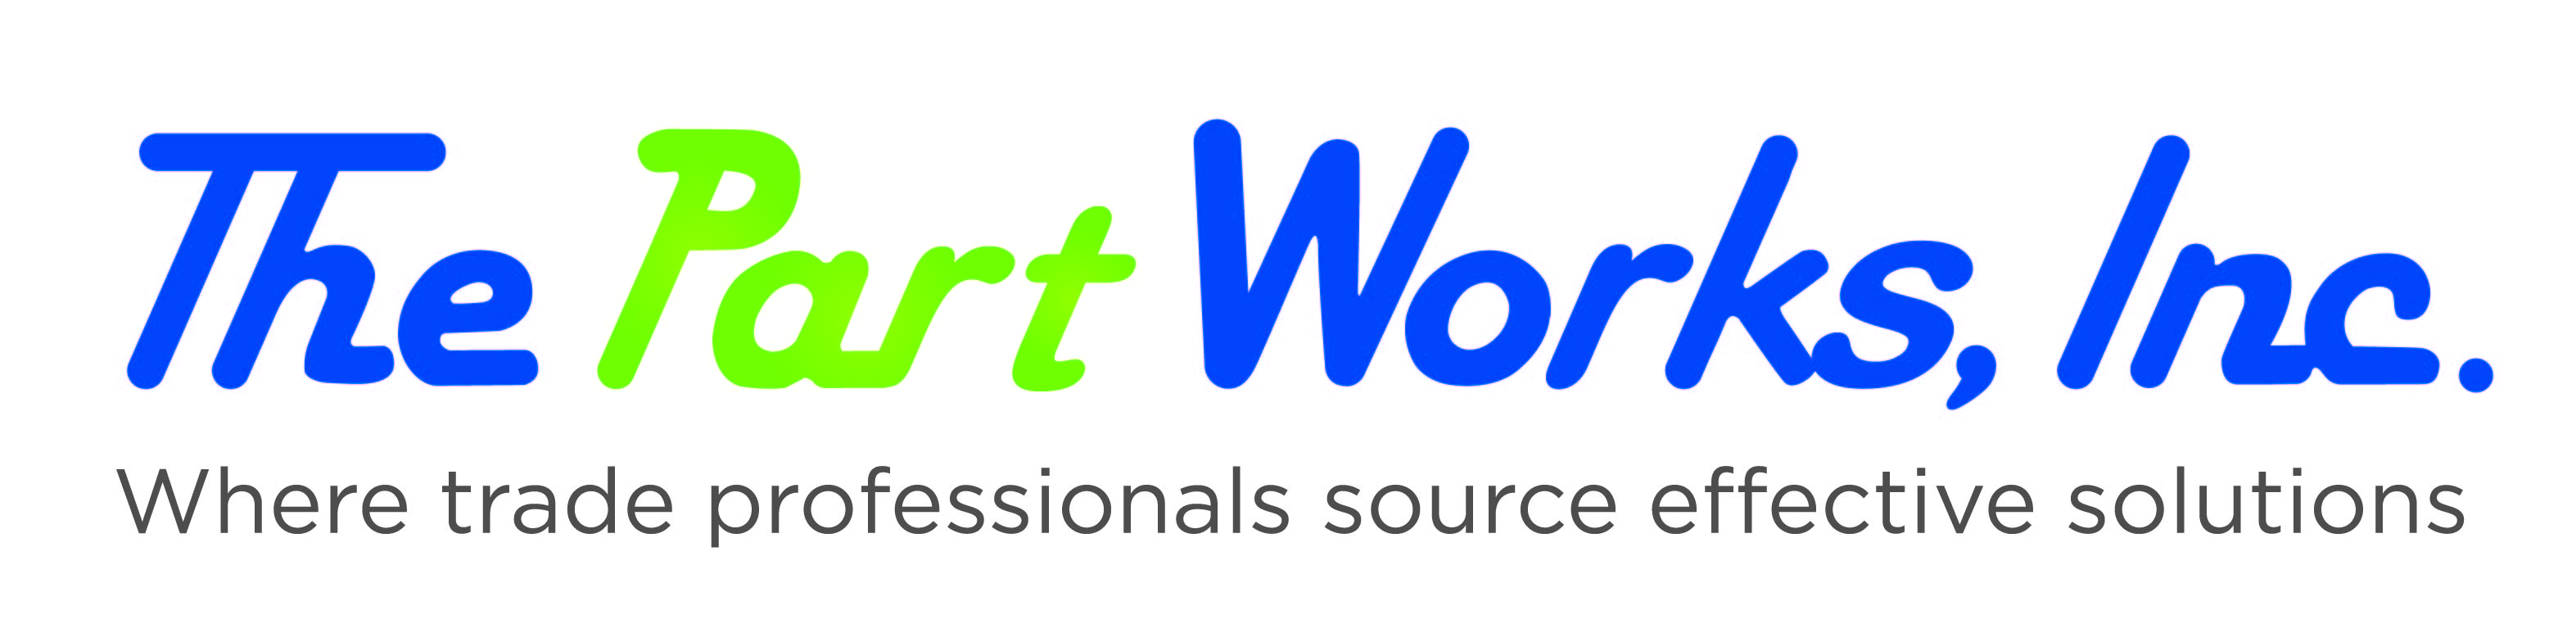 The Part Works Logo